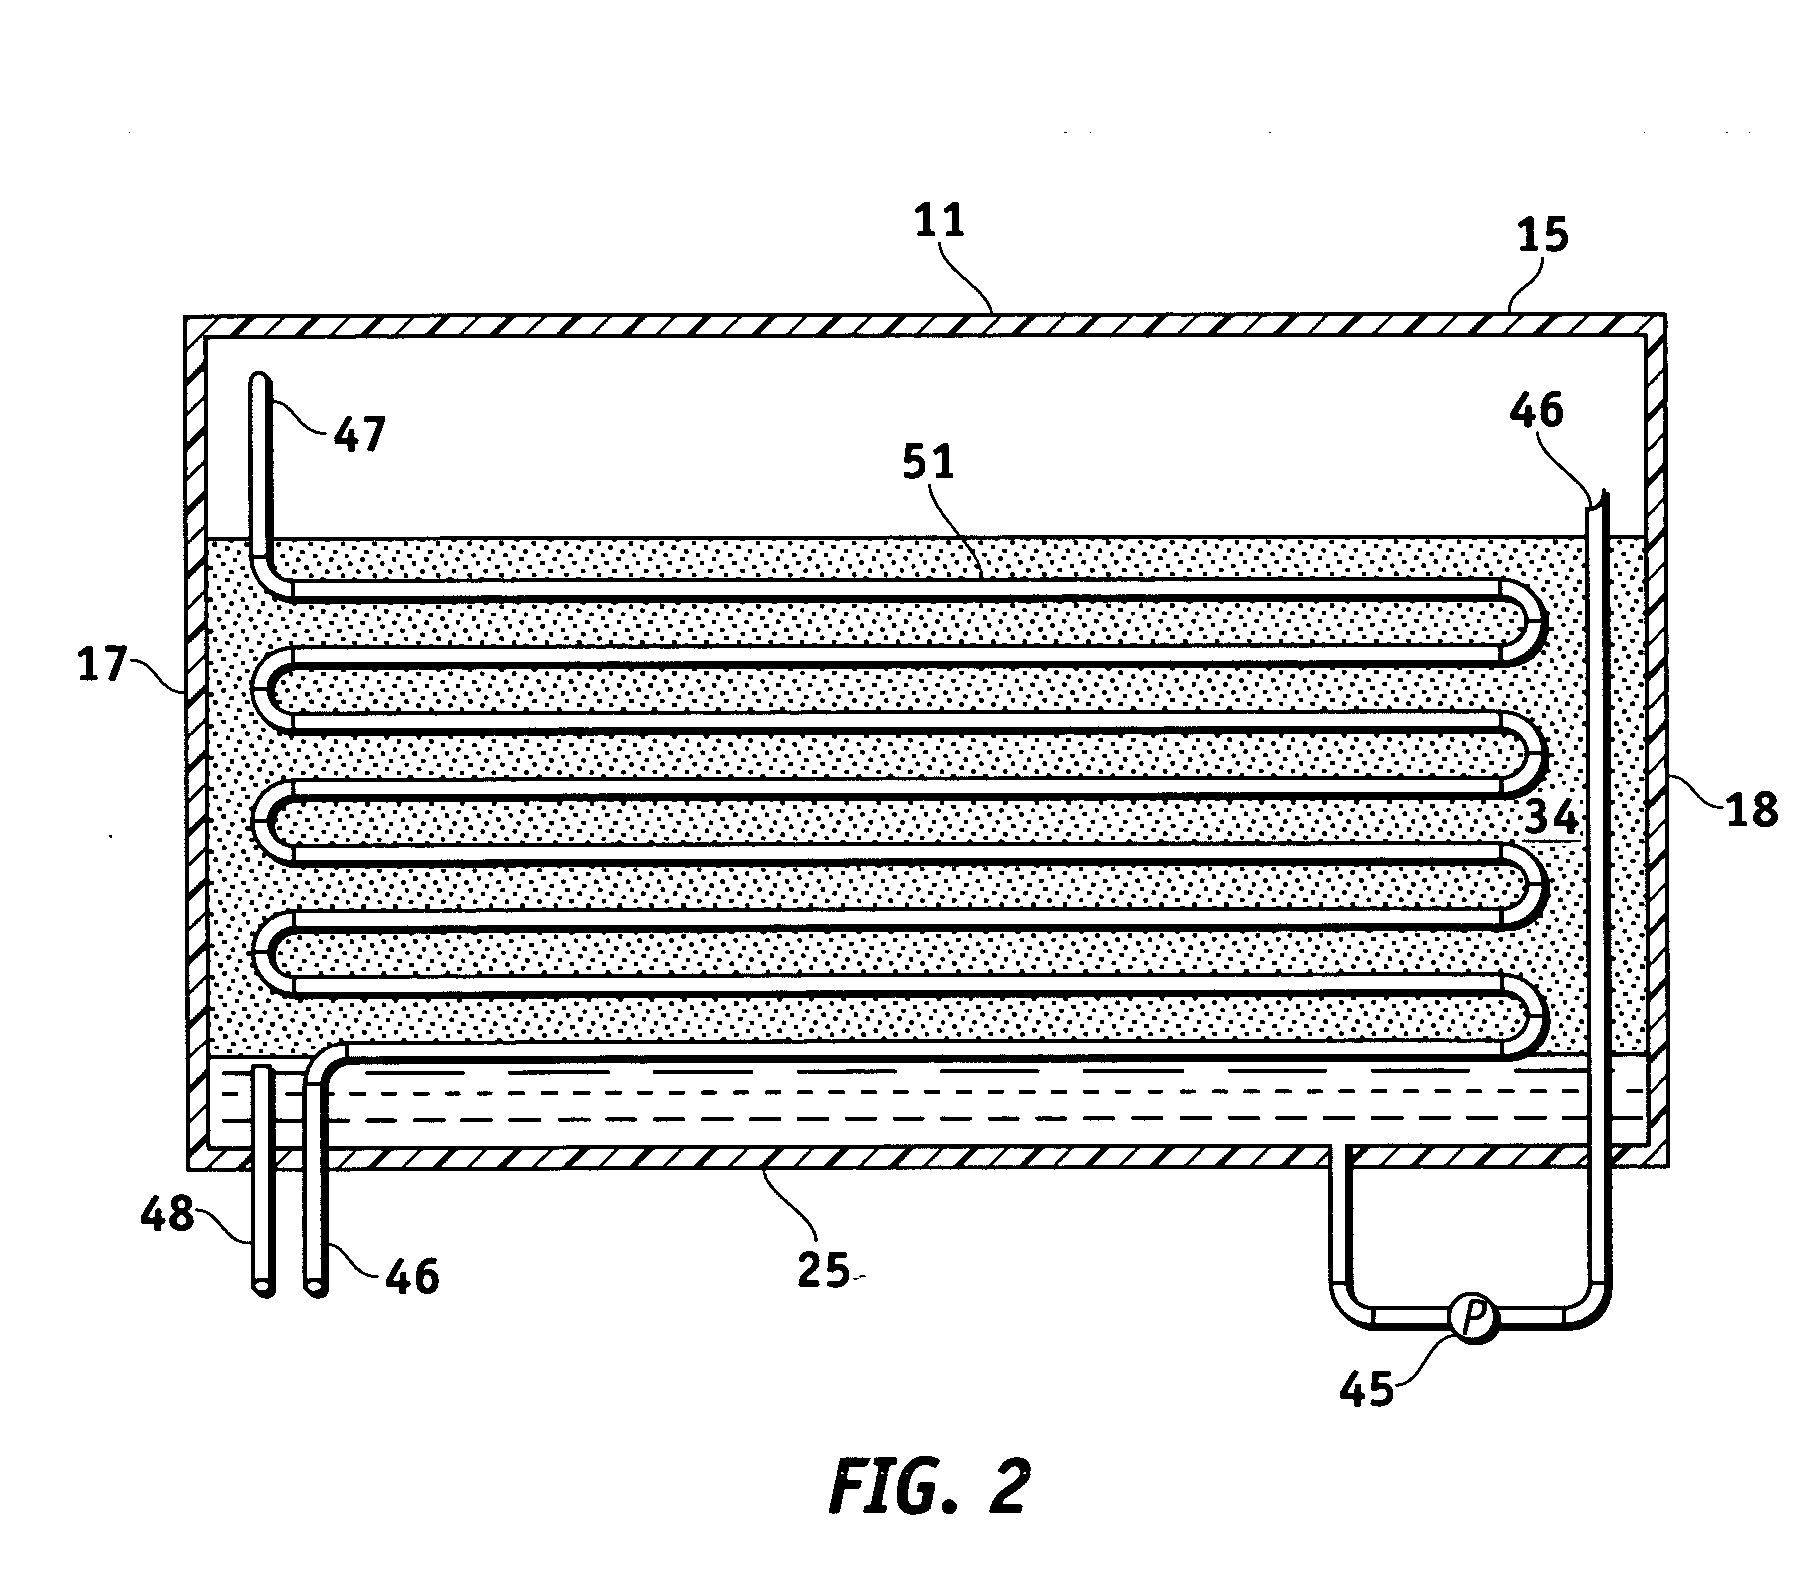 Systems and methods for conditioning air and transferring heat and mass between airflows